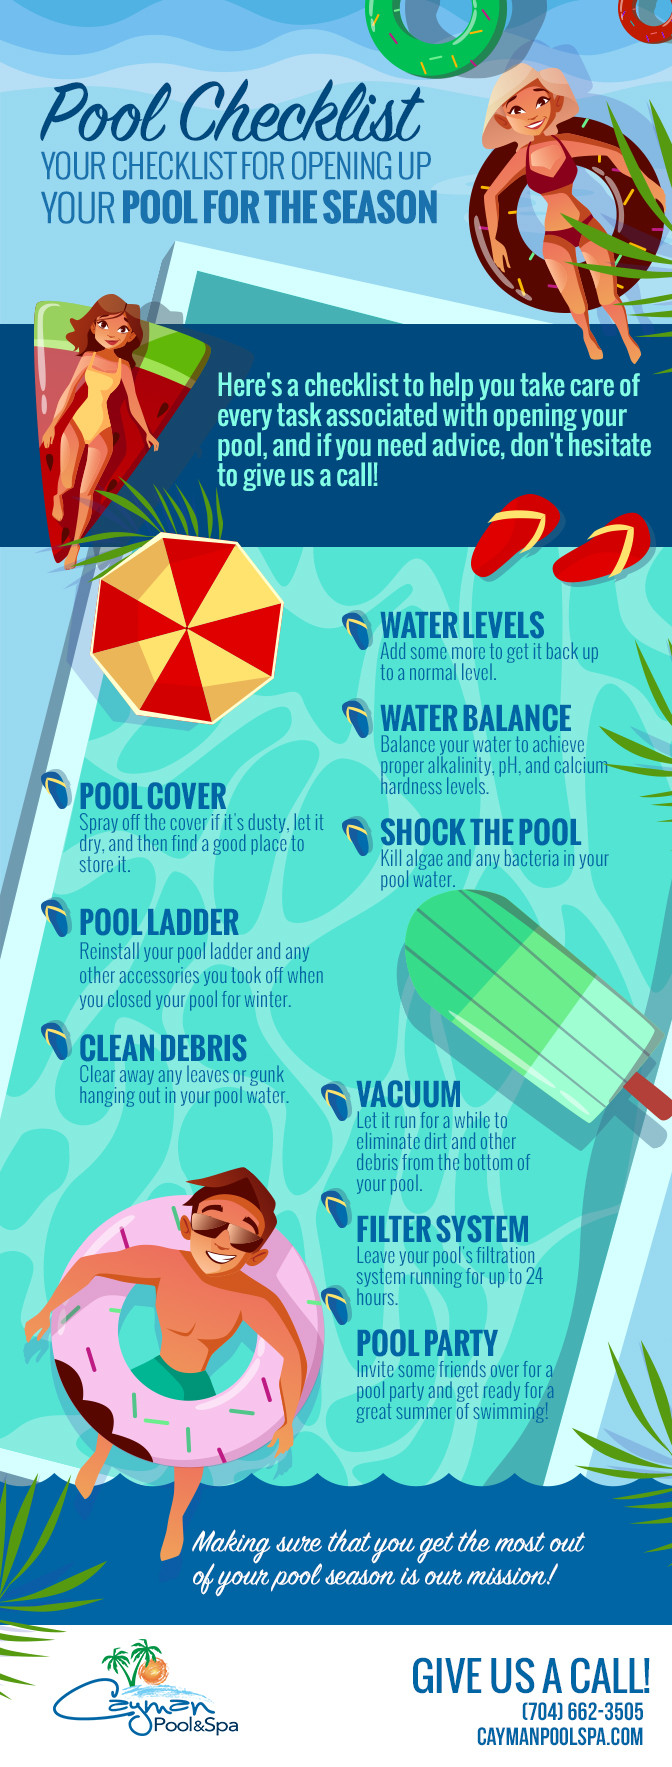 Your checklist for opening up your pool for the season